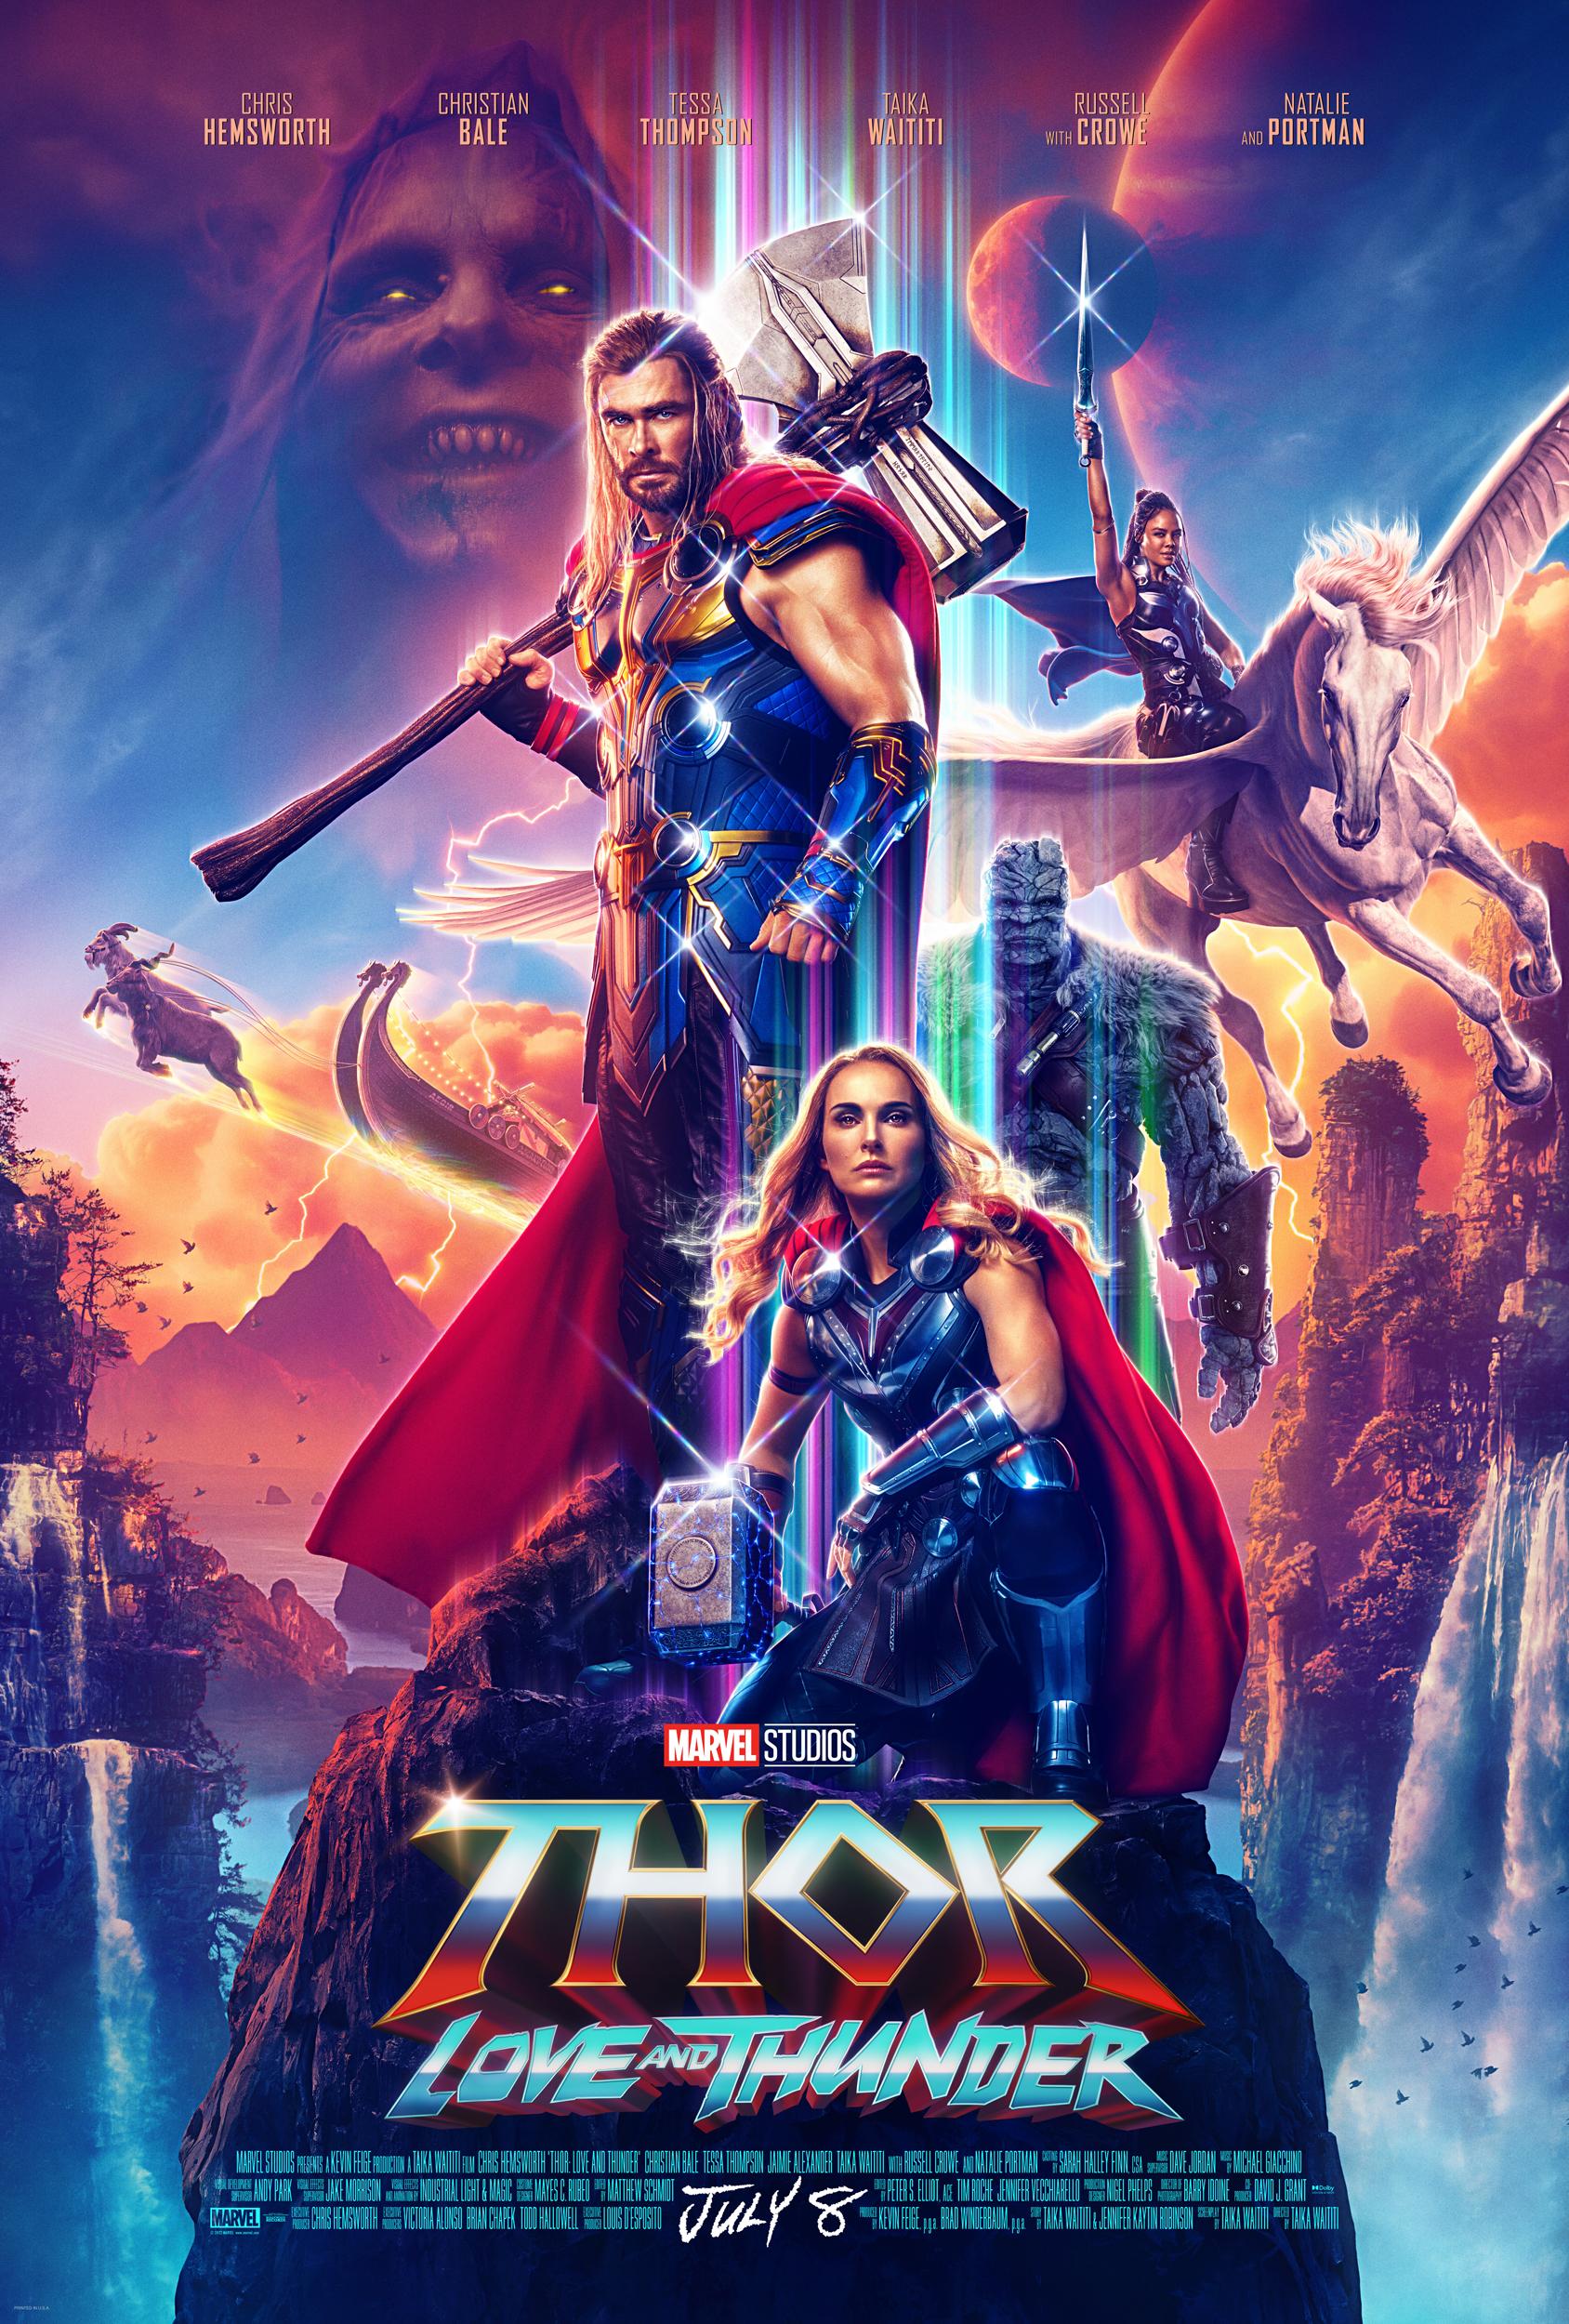 Thor: Love and Thunder (July 8, 2022): Thor returns with a new journey, as Jane Foster takes on the mantle of the Mighty Thor.